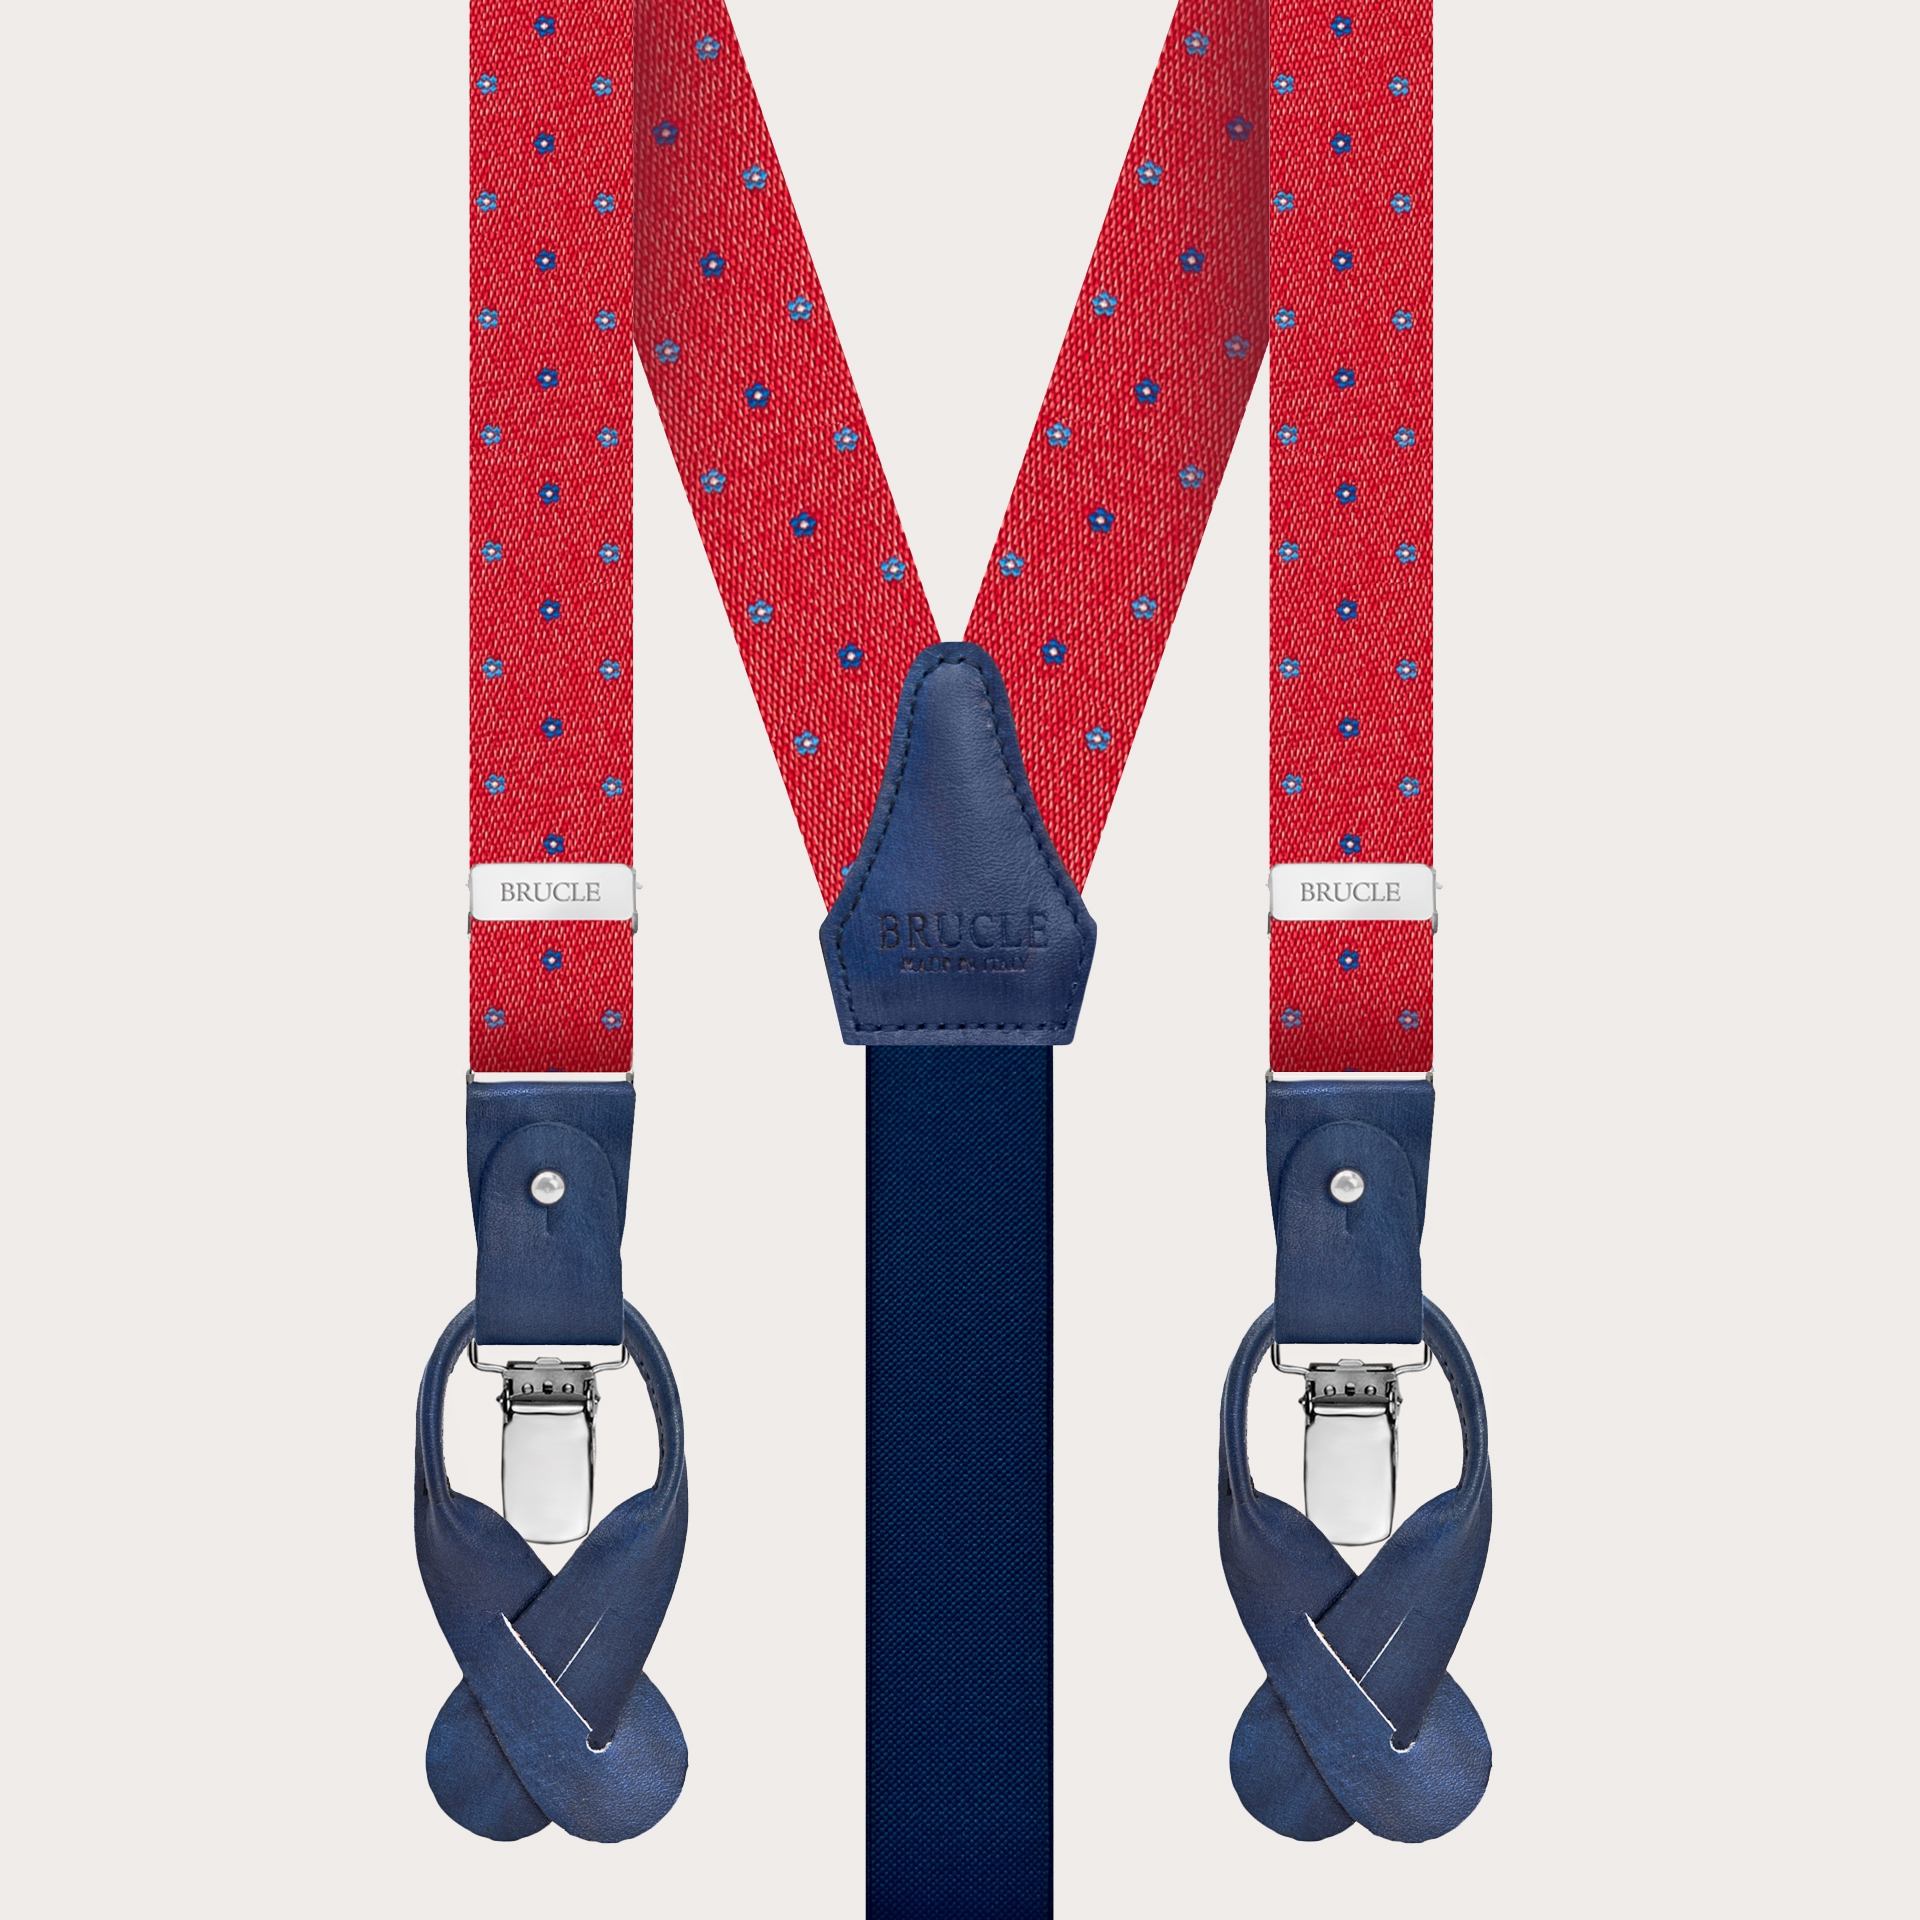 BRUCLE Double use silk suspenders, red floral pattern